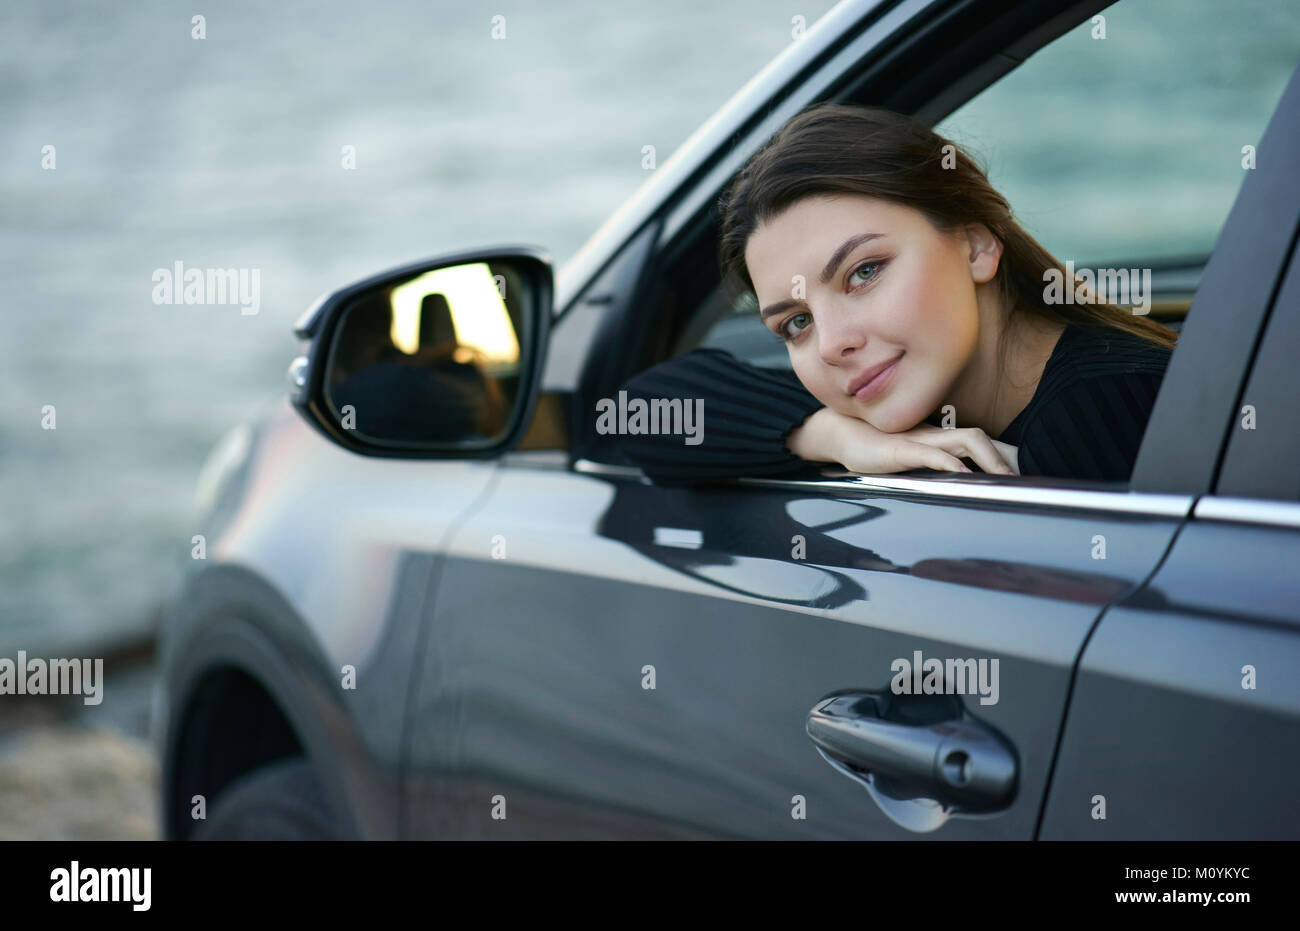 Smiling Caucasian woman leaning in car window Stock Photo